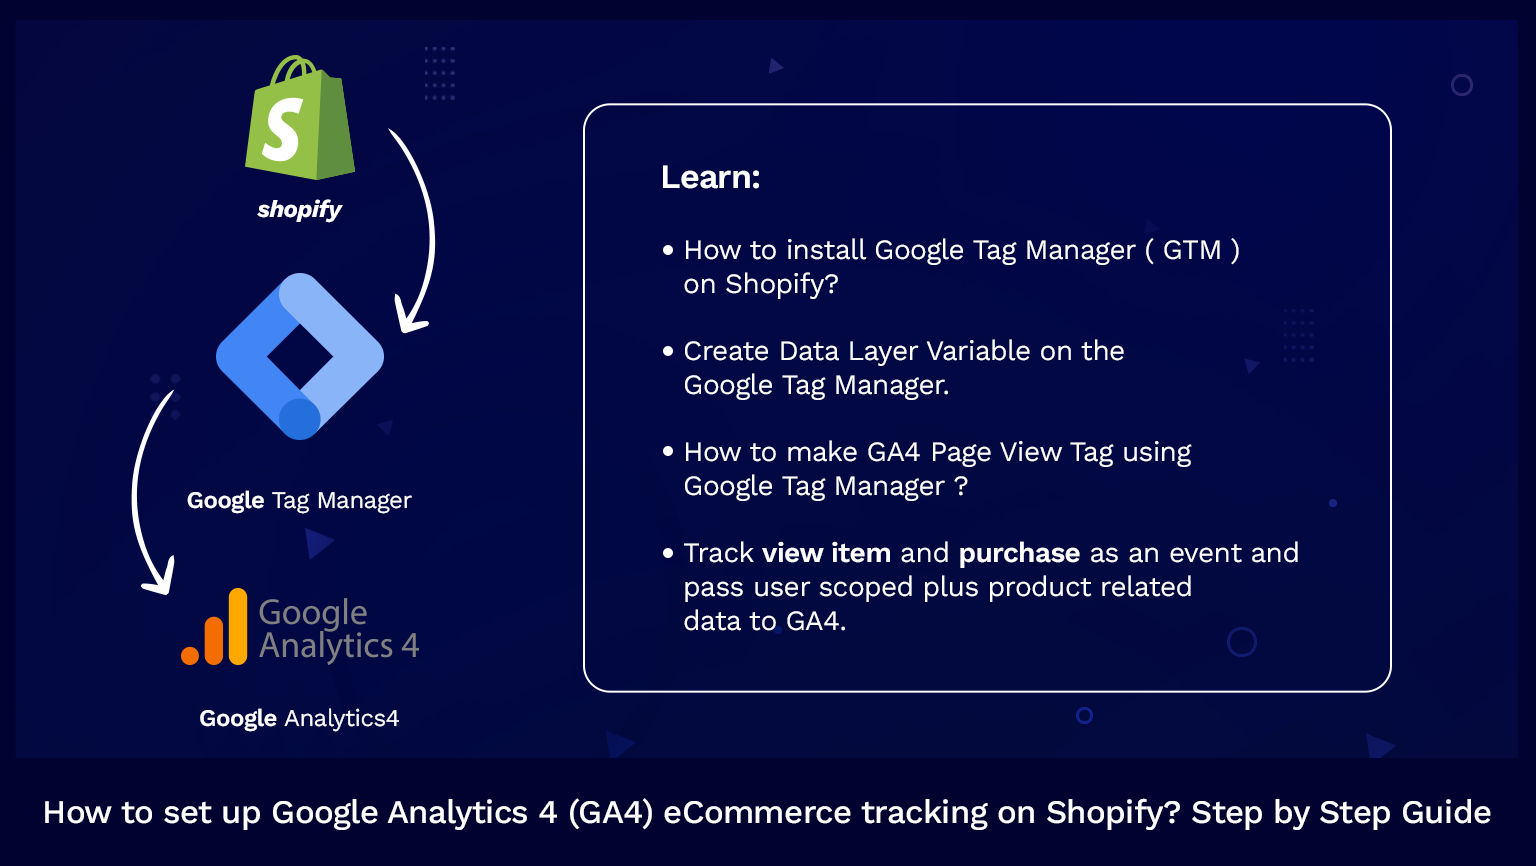 How to set up GA4 eCommerce tracking on Shopify? Step by Step Guide